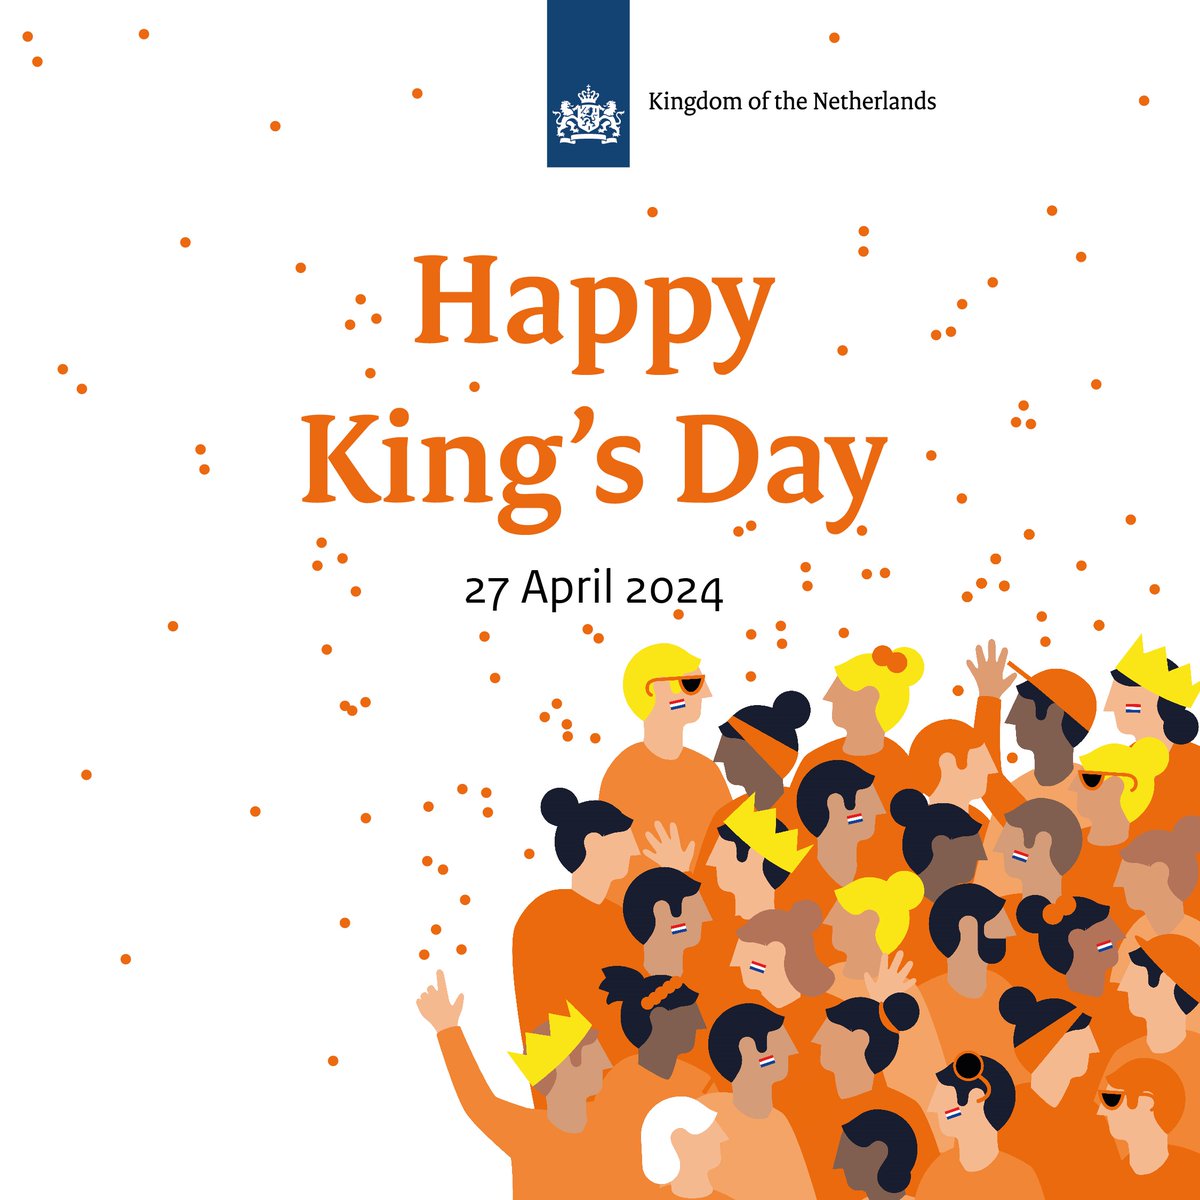 Join us today in celebrating #Kingsday 👑 🇳🇱 the Dutch national day uniting everyone in the entire Kingdom of the Netherlands - Long live the King! #Kingsday2024